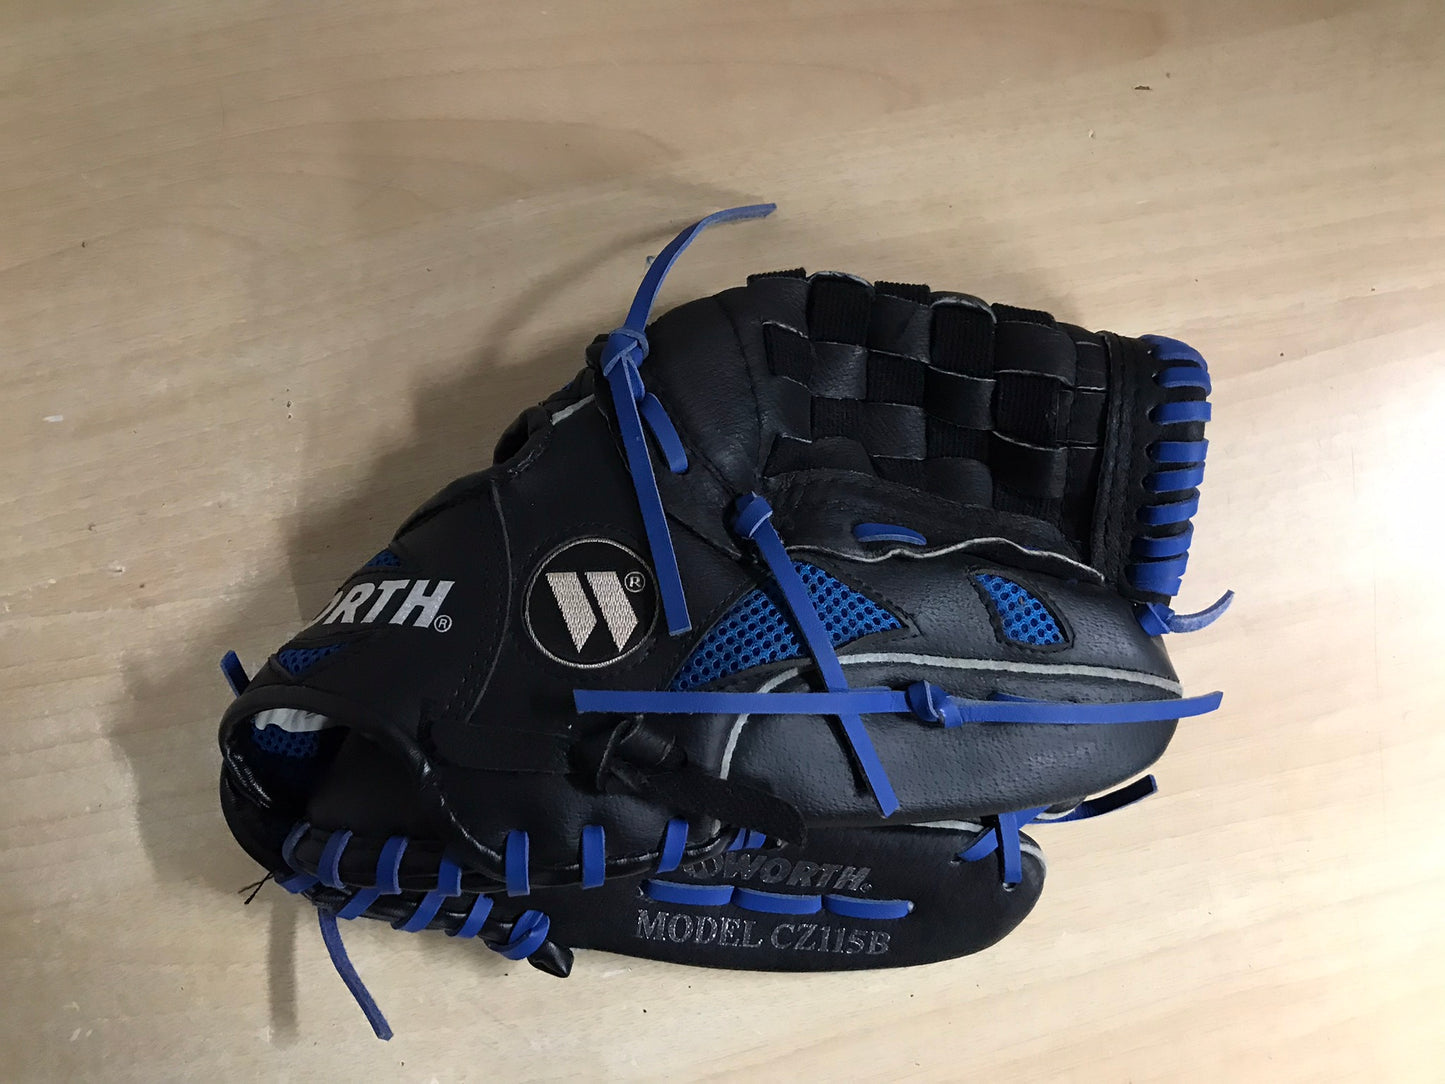 Baseball Glove Adult Size 11.5 inch Worth Silencer Black Blue Leather Fits on Left Hand